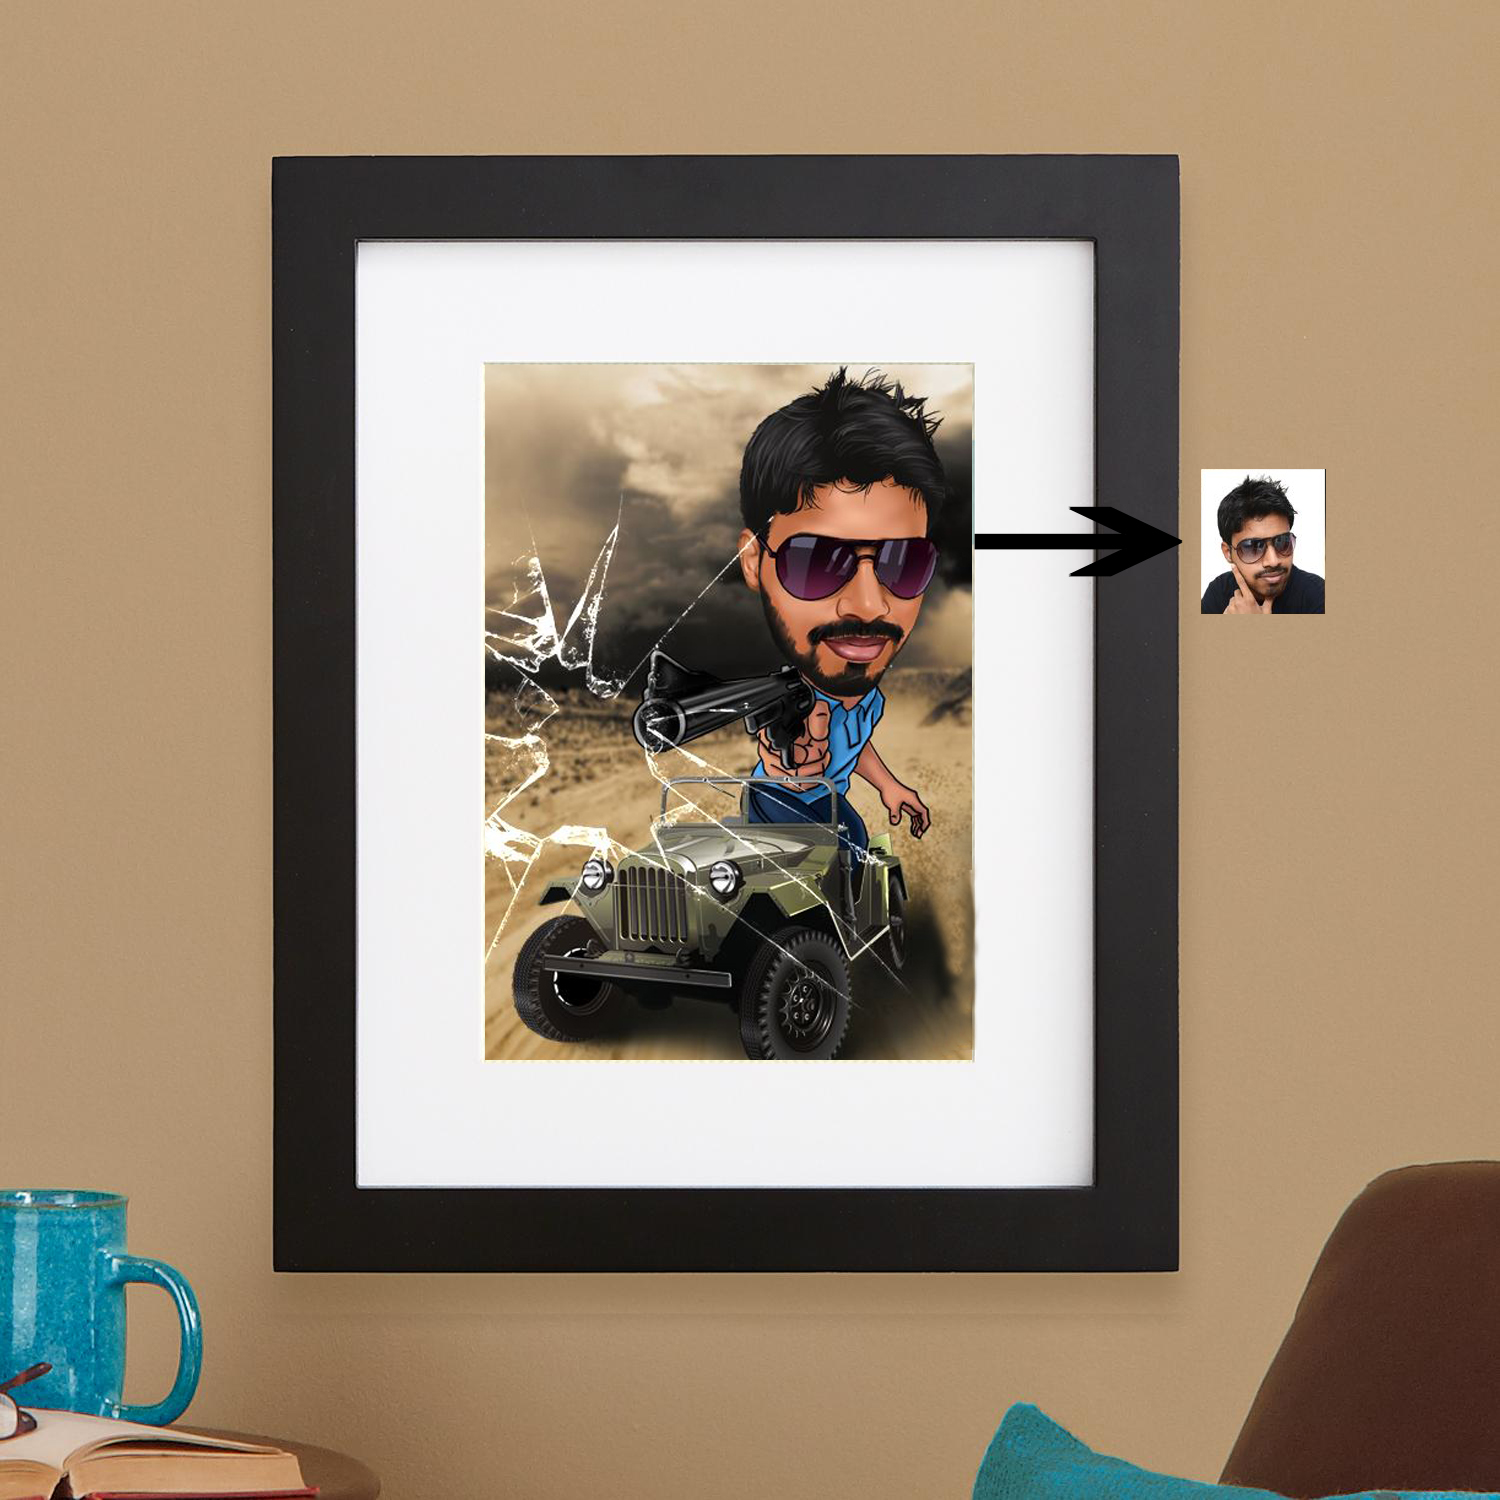 Buy Get your own caricature Frame - Best Gift Online @ ₹1949 from ShopClues